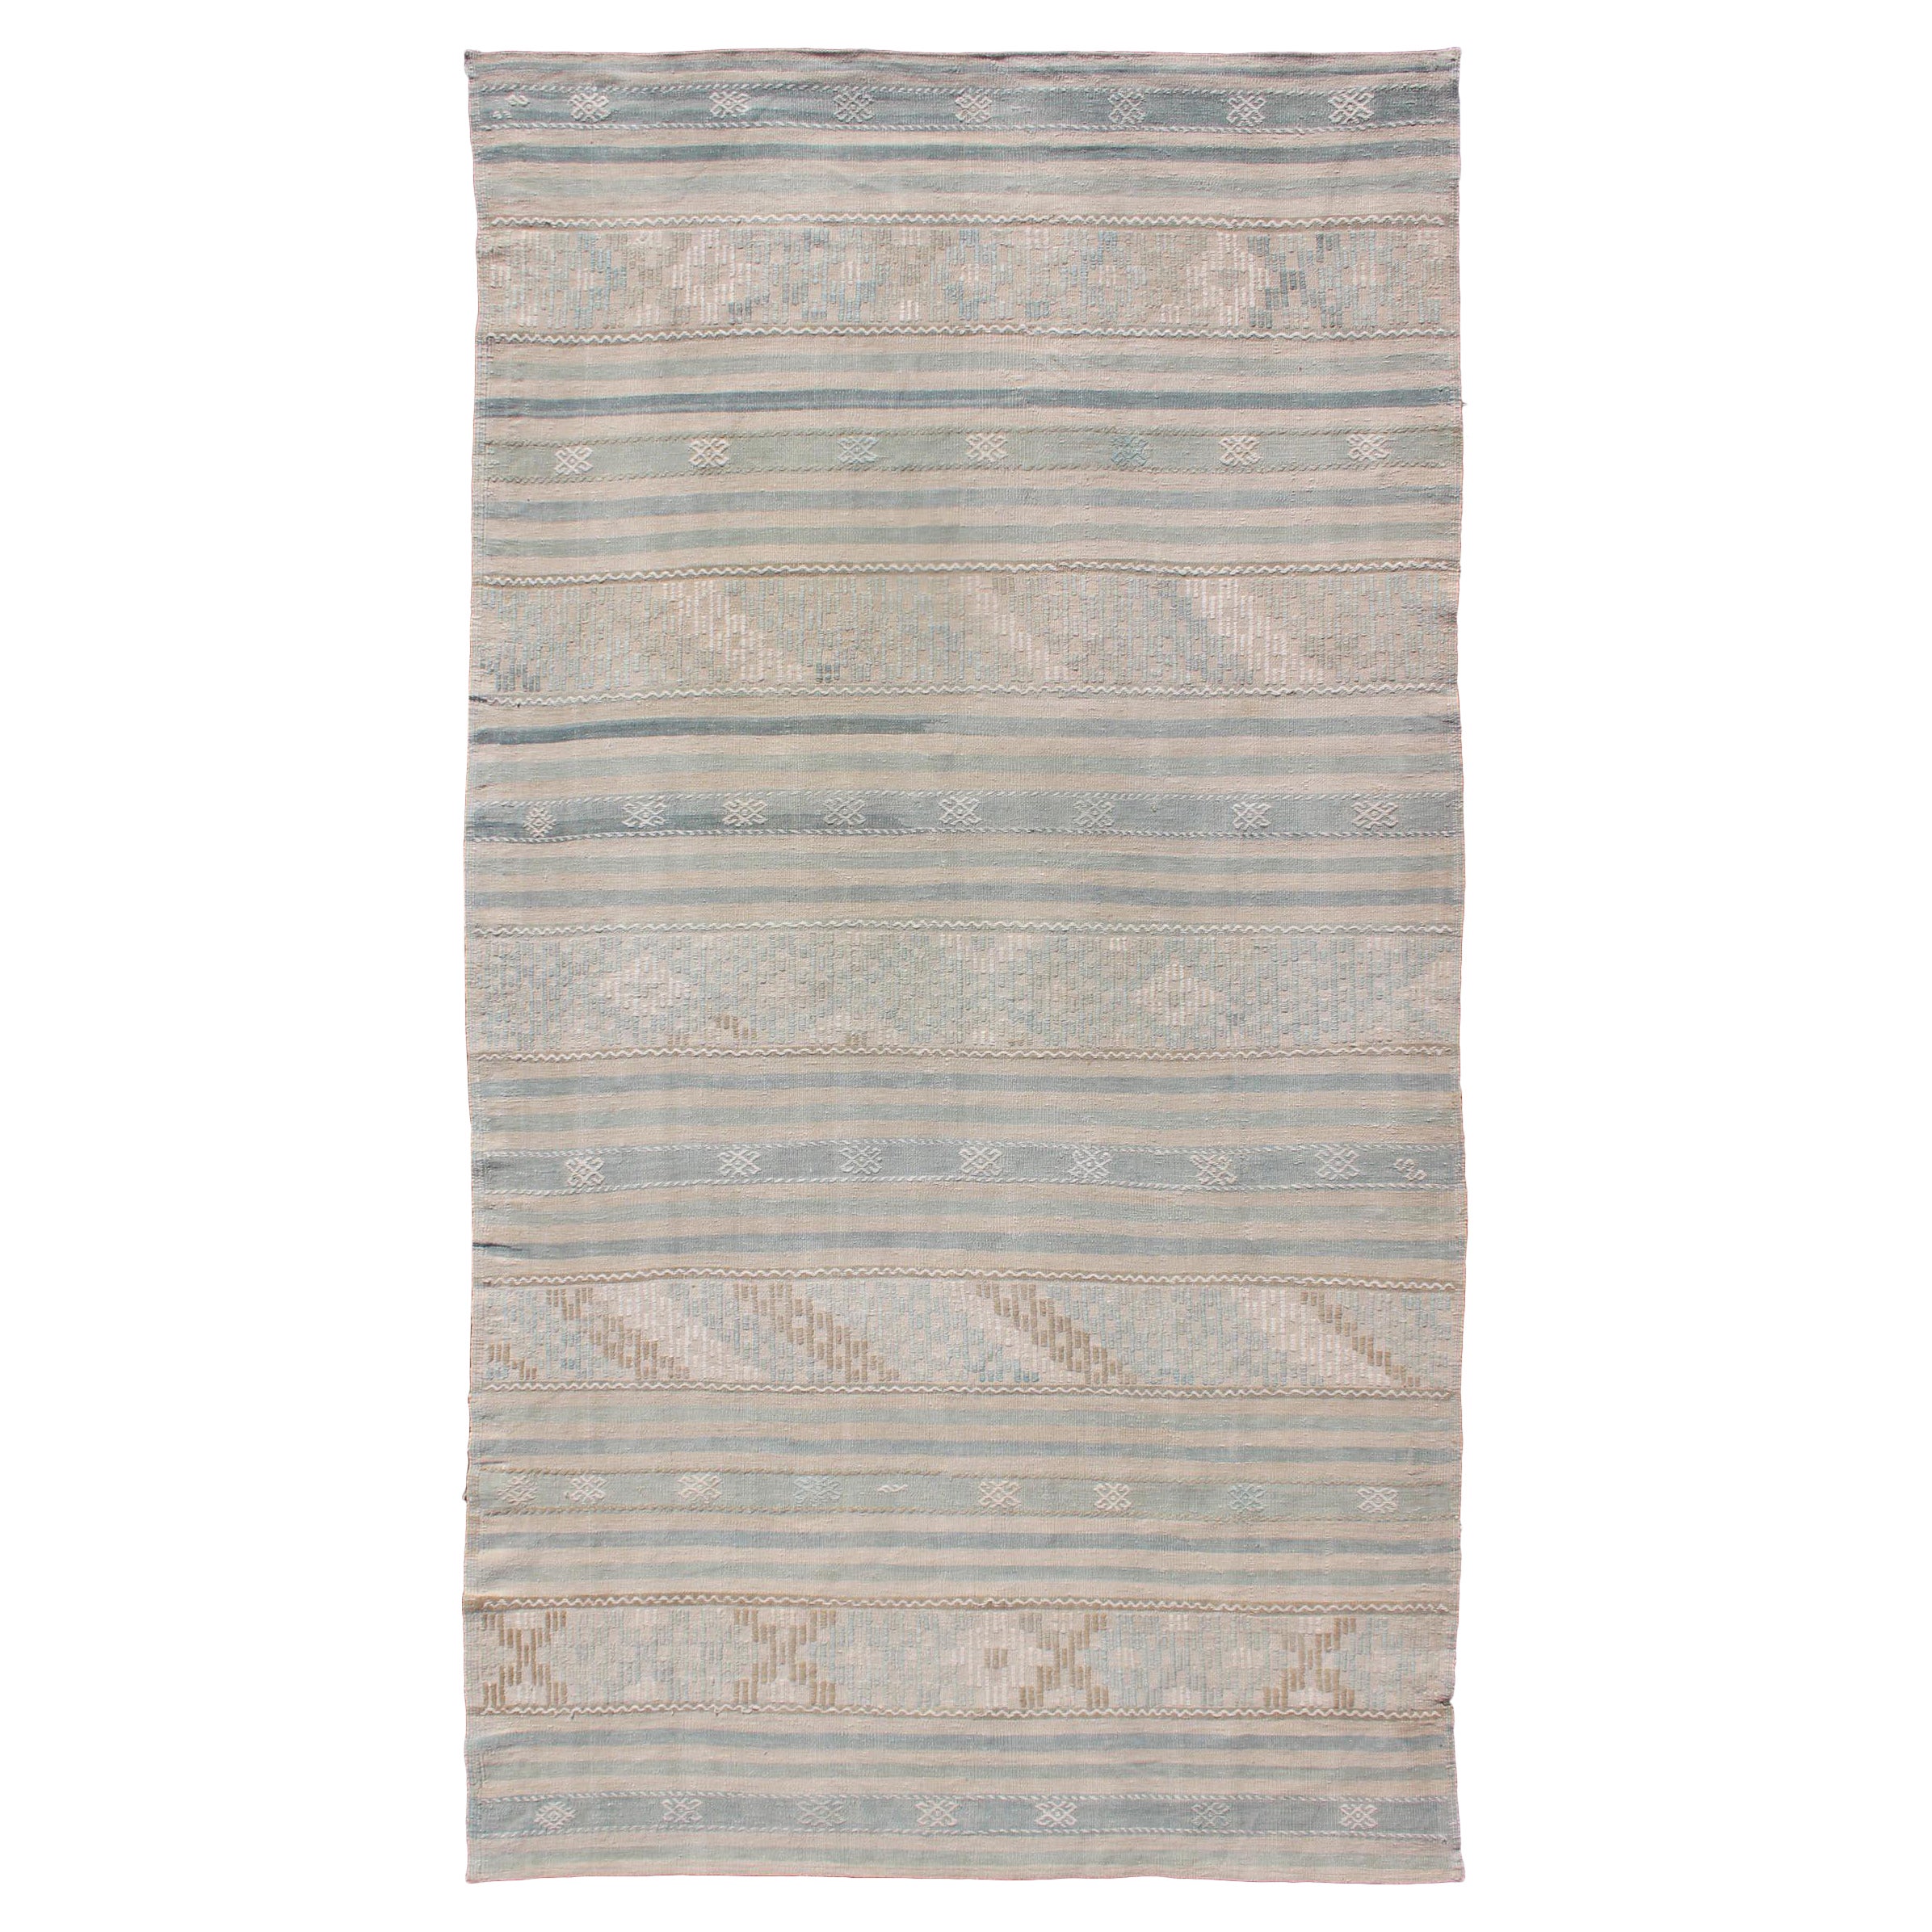 Natural-Toned Turkish Flat-Weave Kilim with Geometric Stripes Tan and Seafoam For Sale